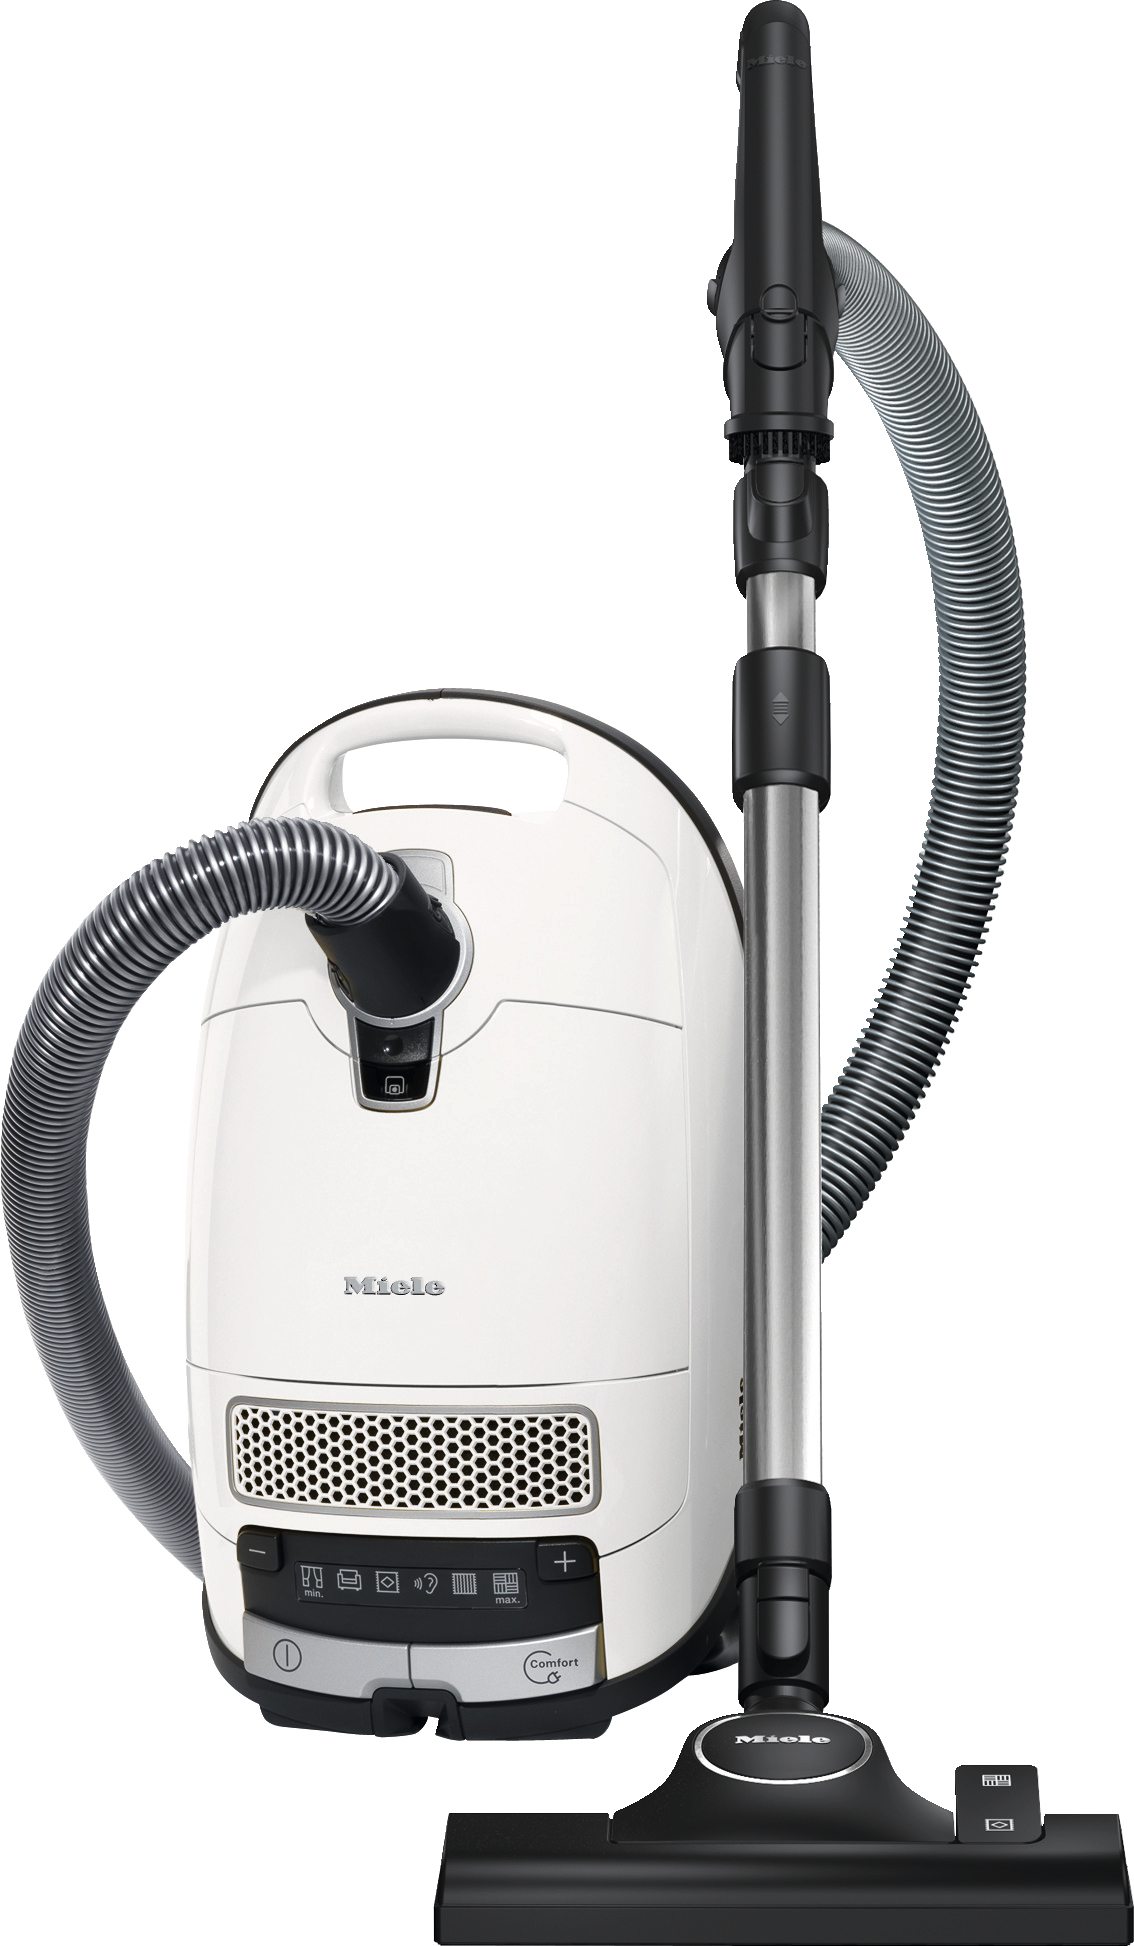 Miele Complete C3 Allergy